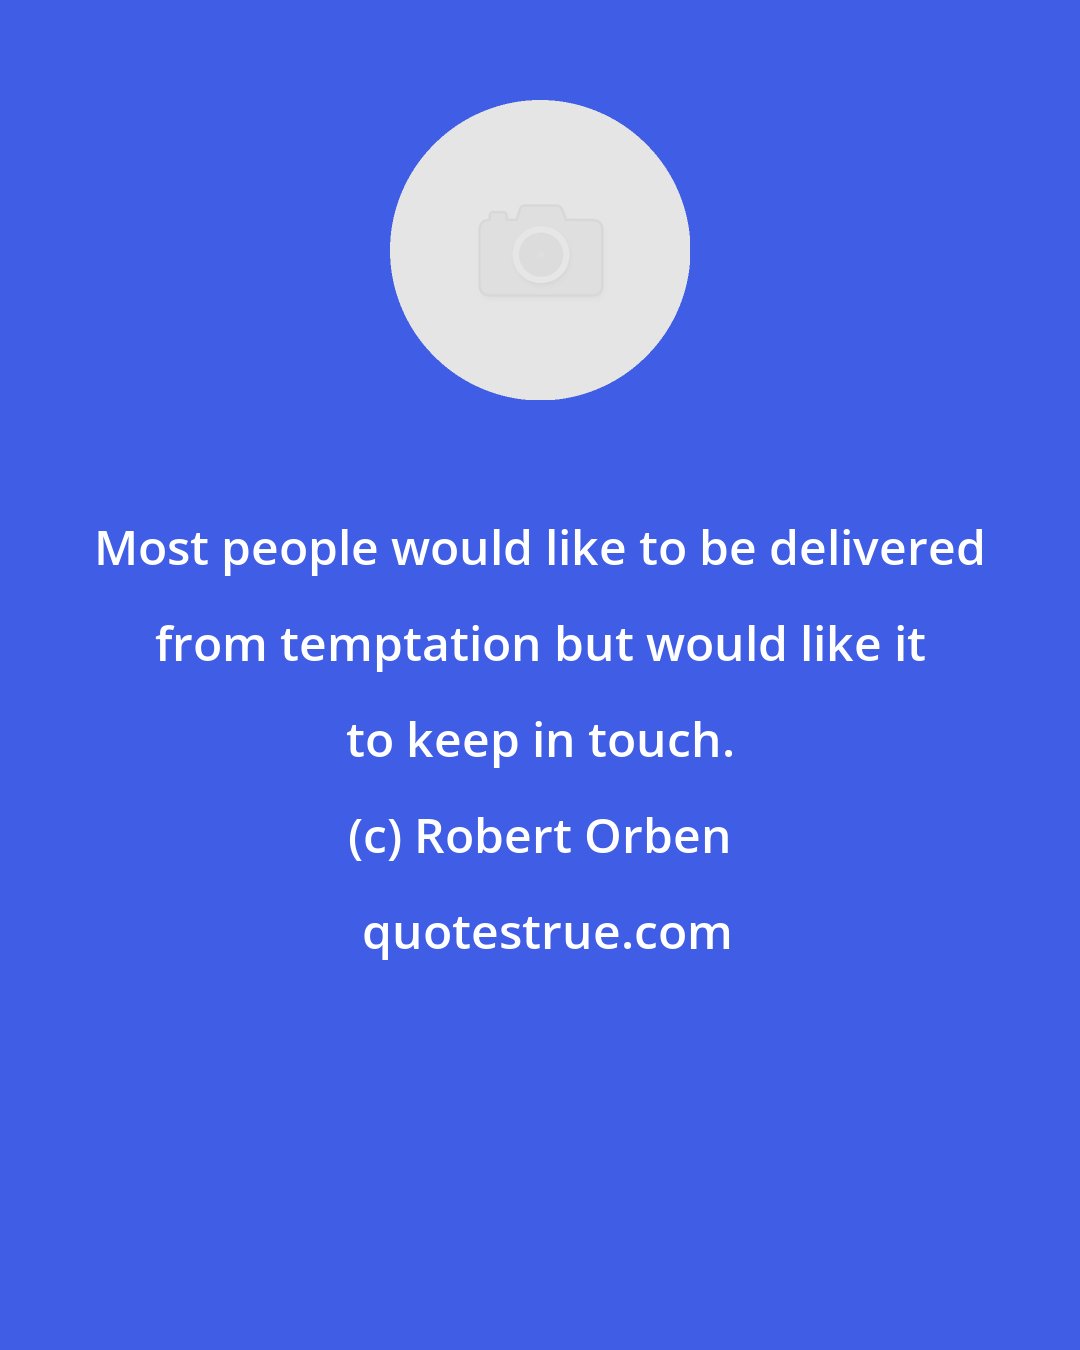 Robert Orben: Most people would like to be delivered from temptation but would like it to keep in touch.